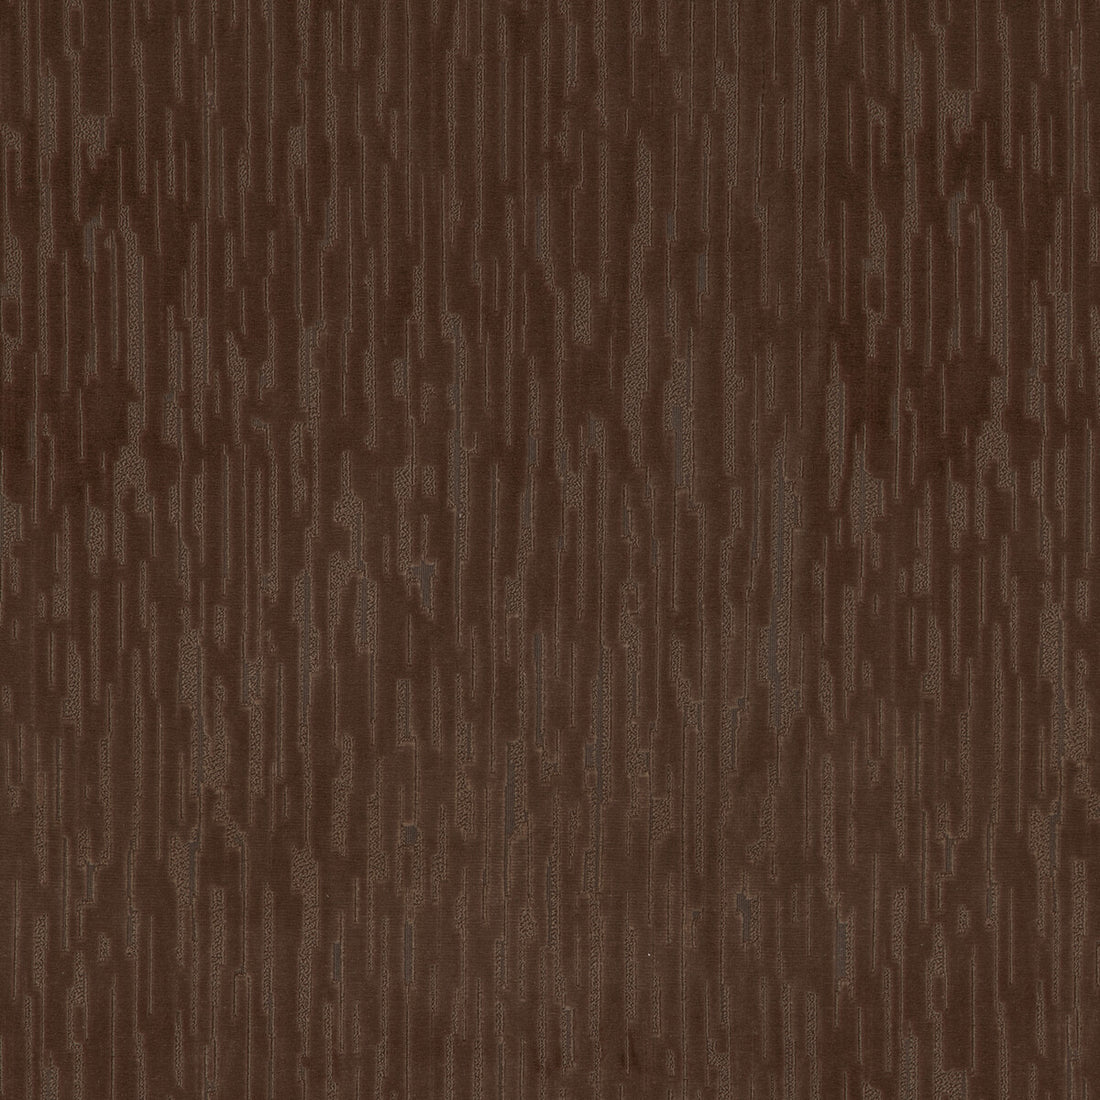 Rendezvous fabric in walnut color - pattern 37283.6.0 - by Kravet Contract in the Happy Hour collection